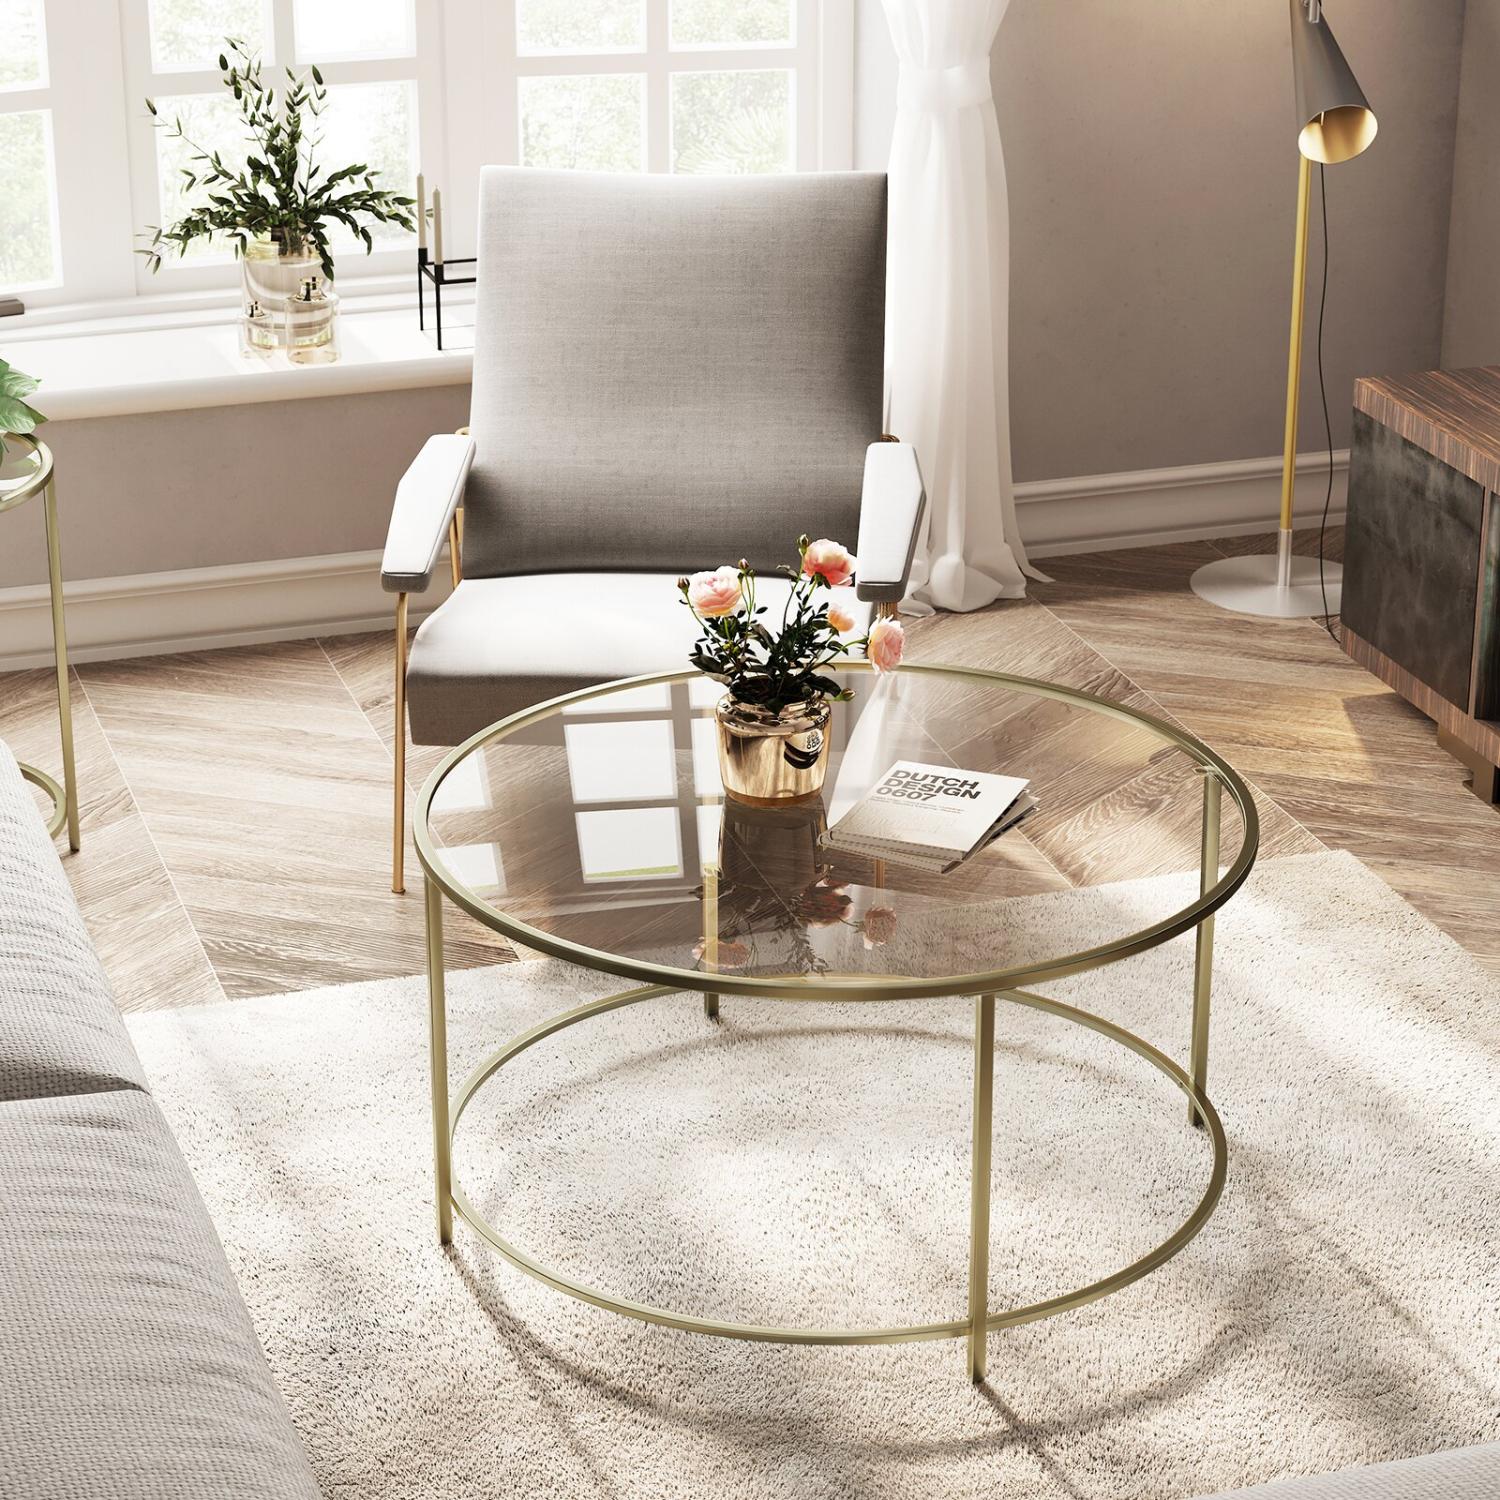 ViscoLogic Regal Mid-Century Elegant Round Clear Glass Table, Metal Frame Coffee/Center Table For Your Living Room, Bedroom (Golden)